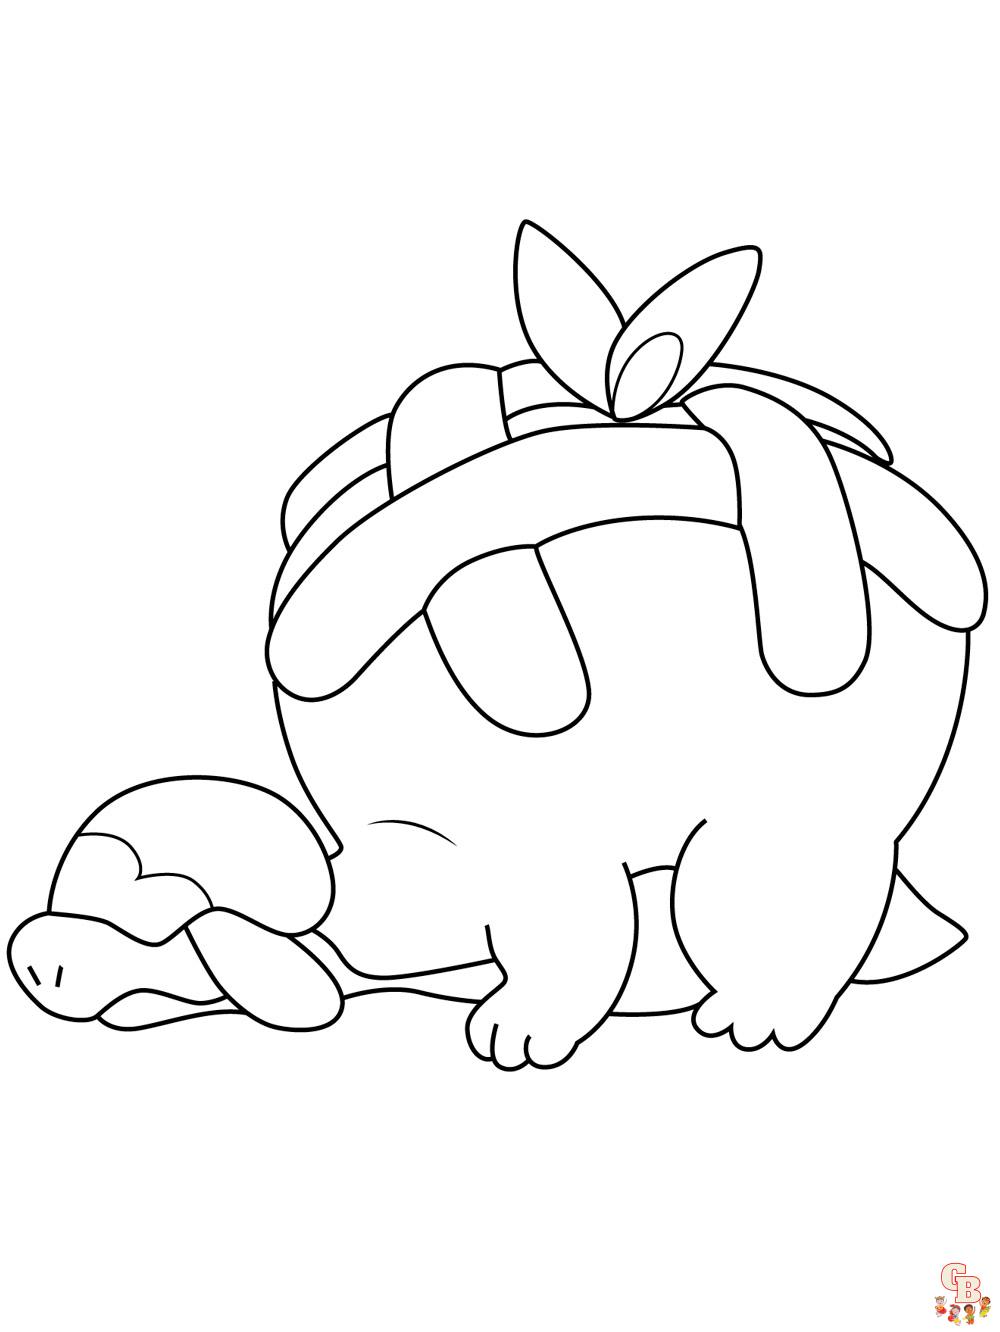 Appletun Coloring Page 1